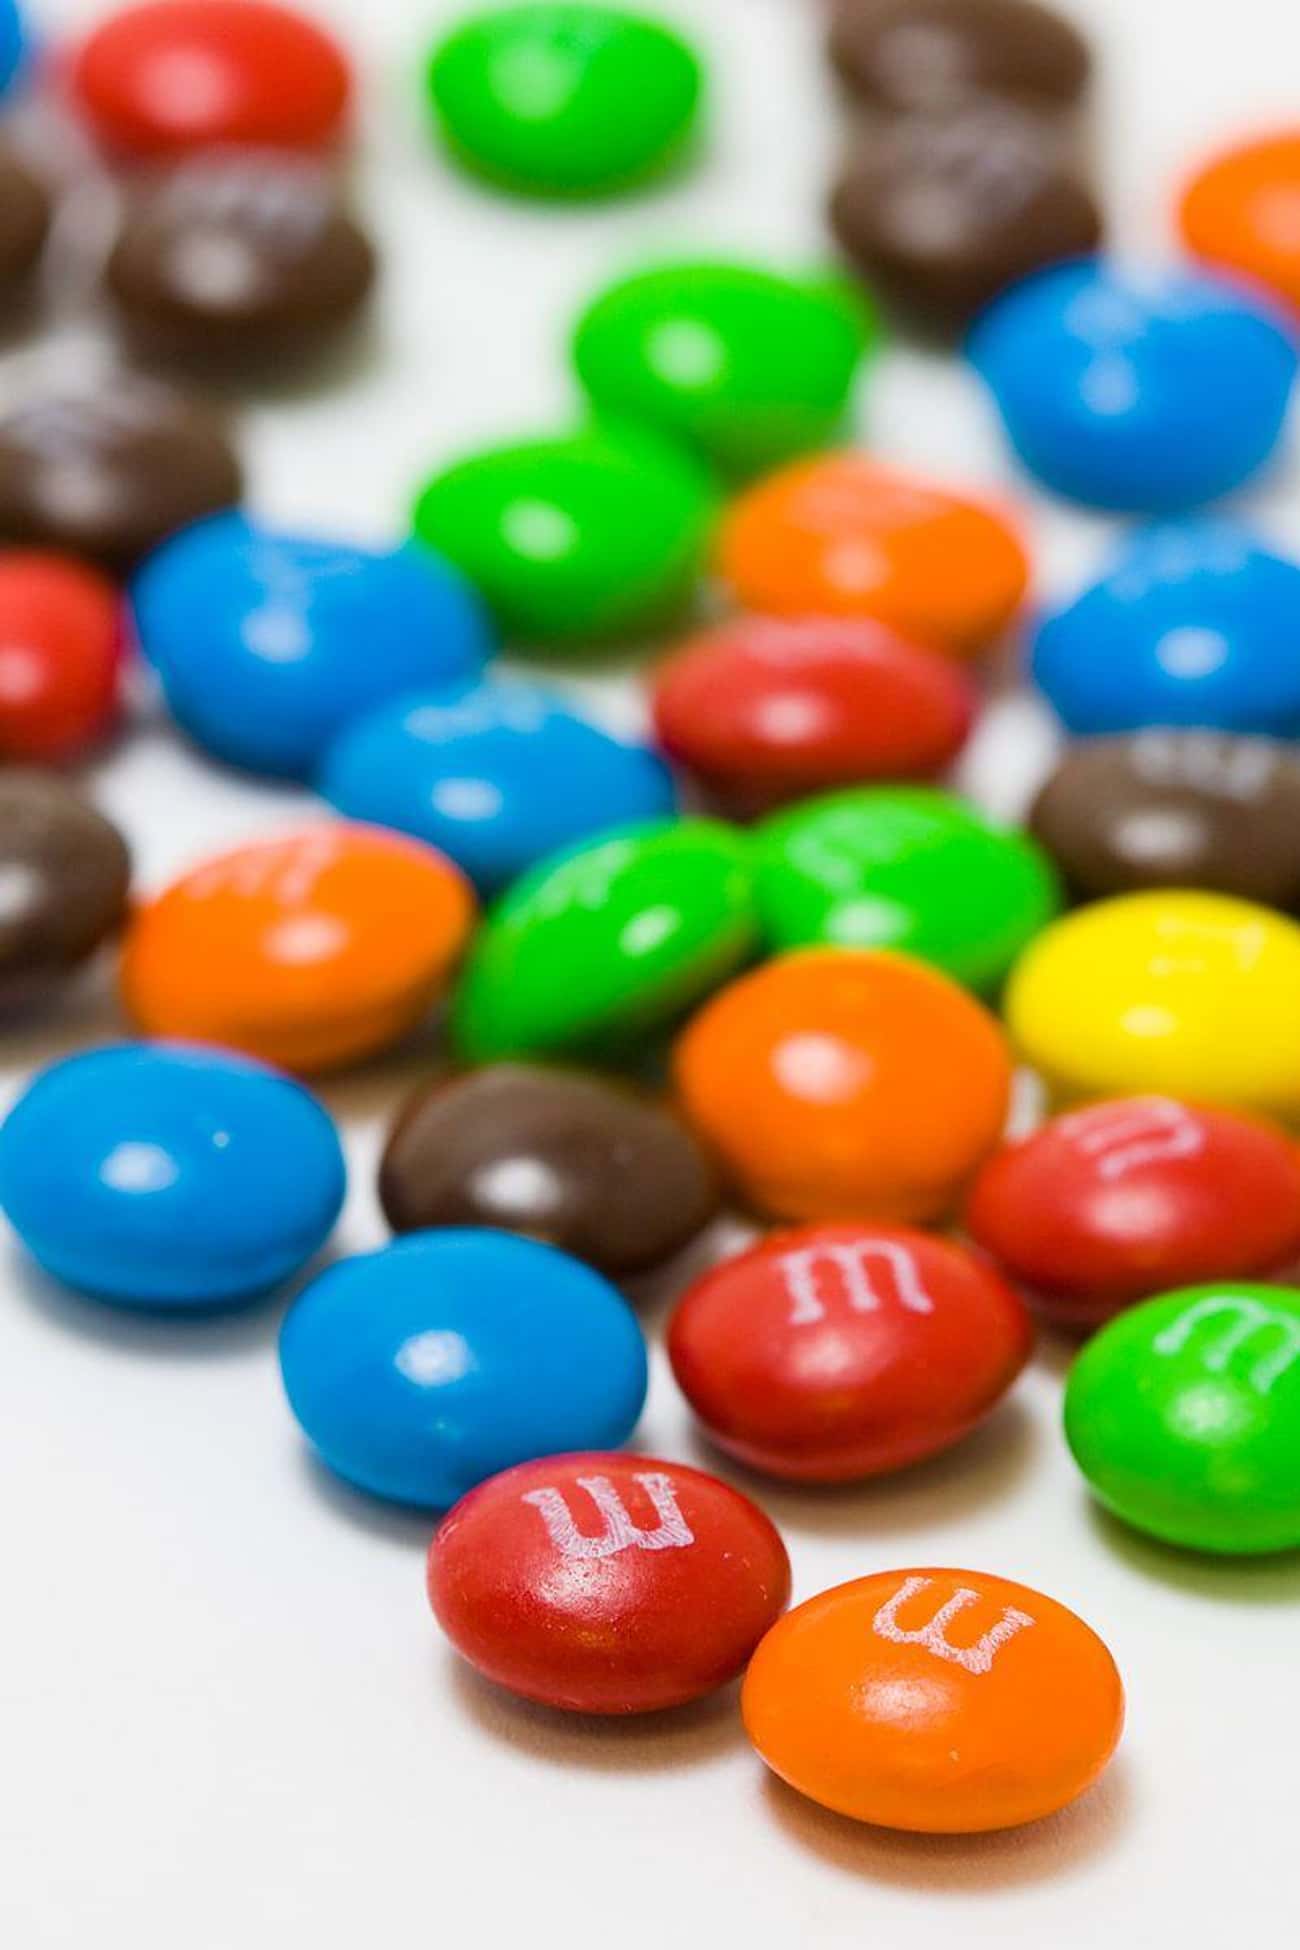 The 'M' In M&Ms Are For The Candy's Founders 